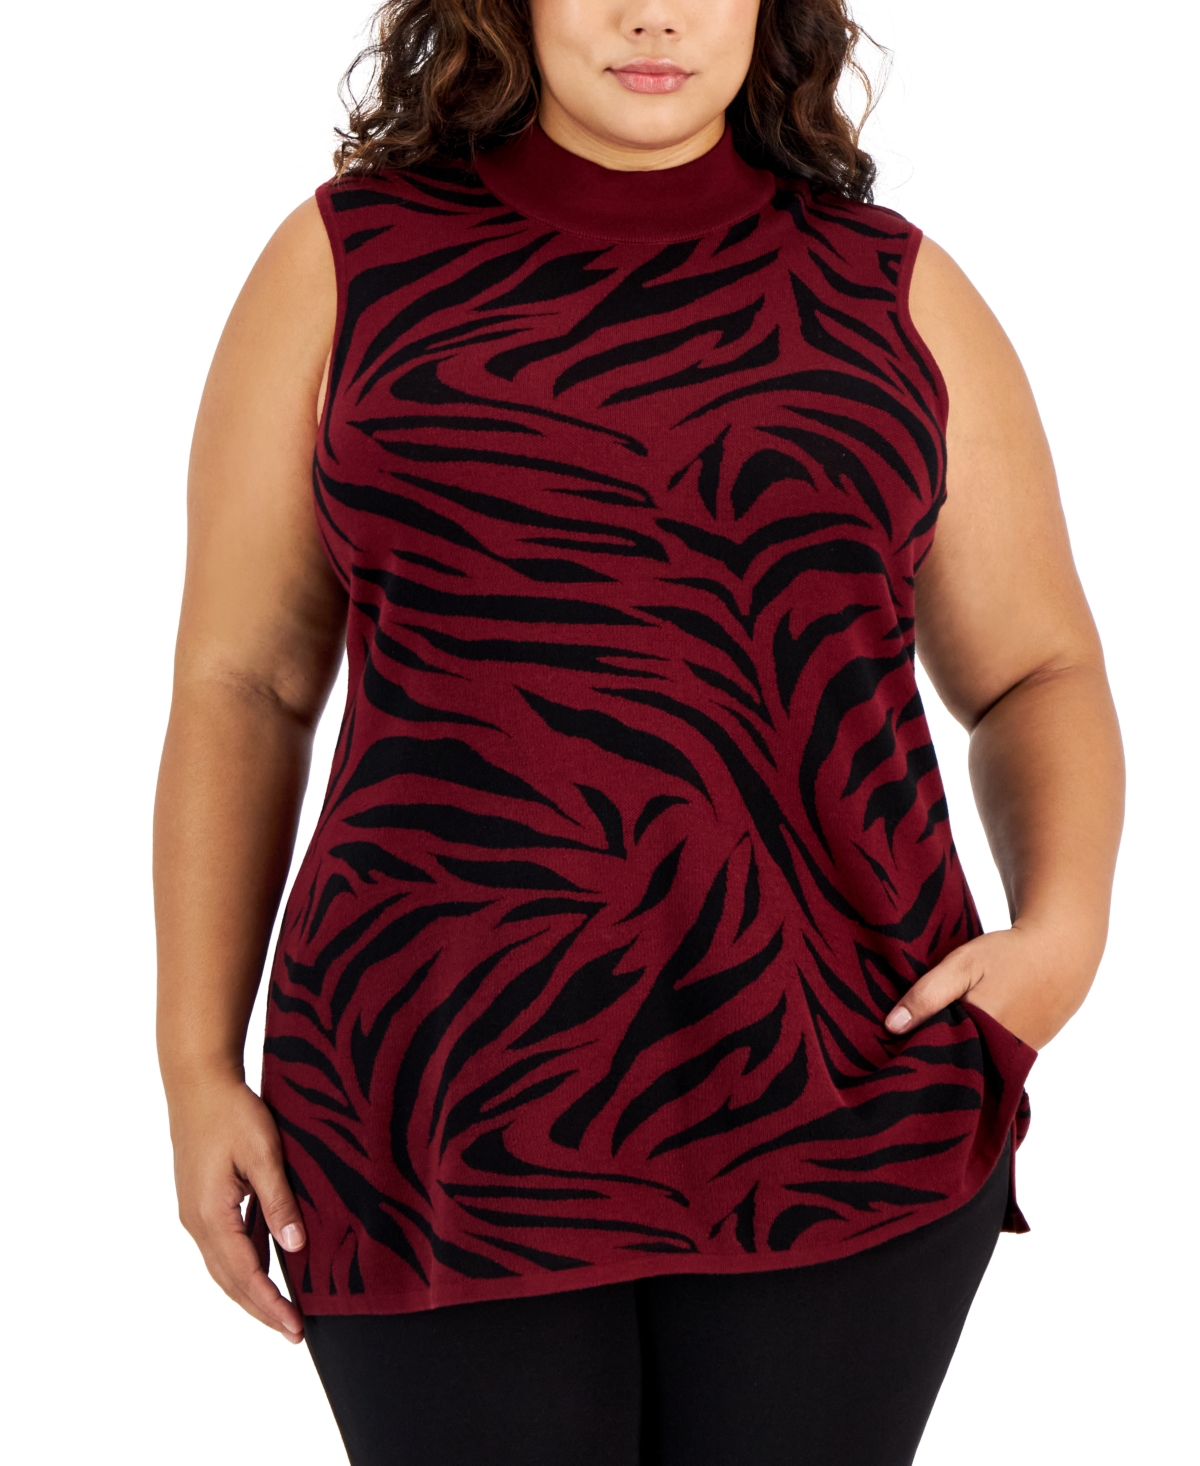 Jm Collection Plus Size Animal-Print Mock-Neck Sweater, Created for Macy's